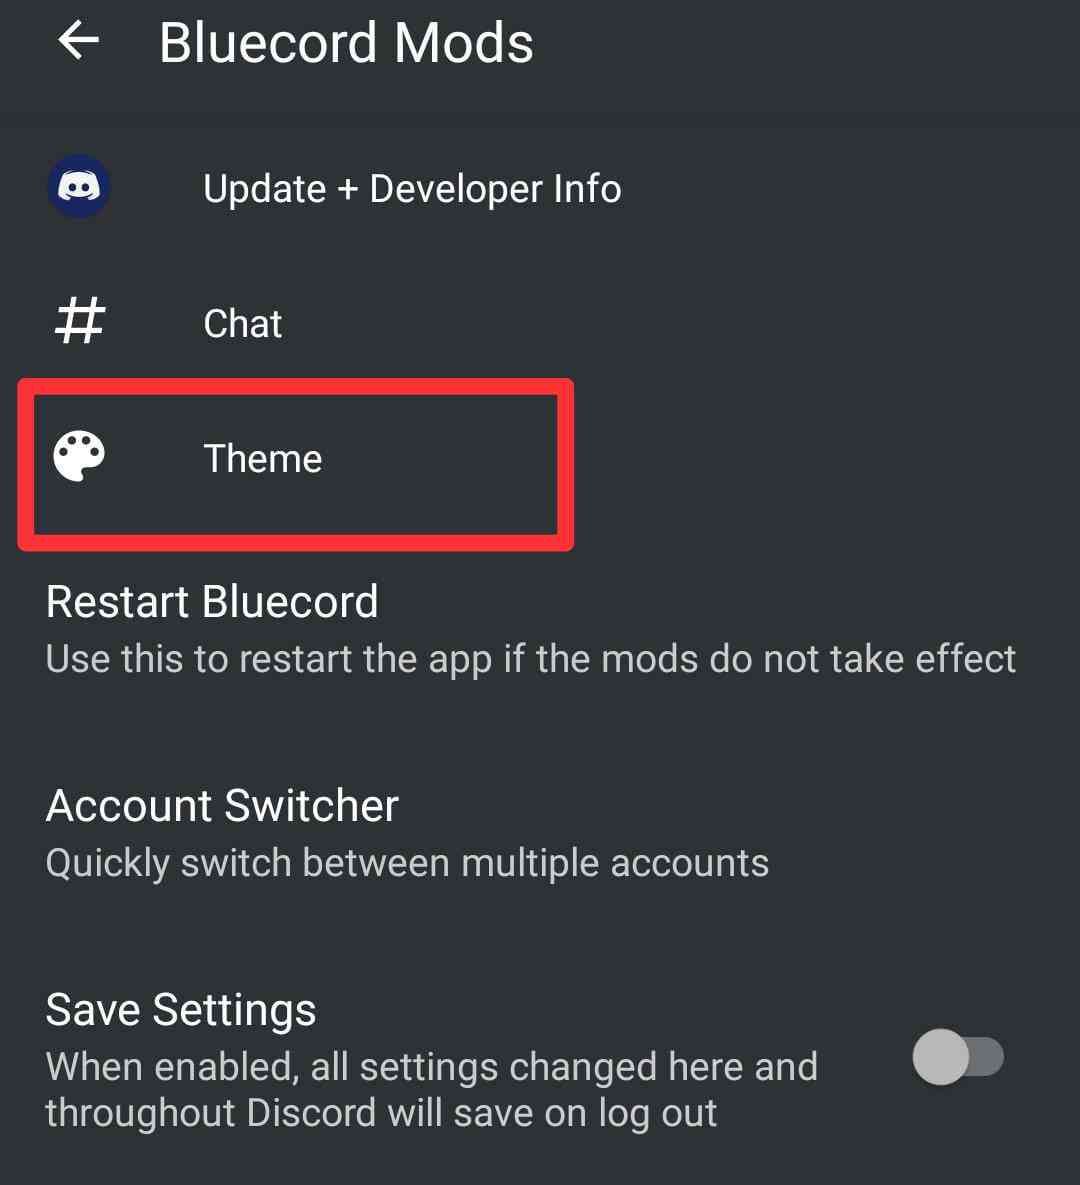 Go chat themes plugin apk download